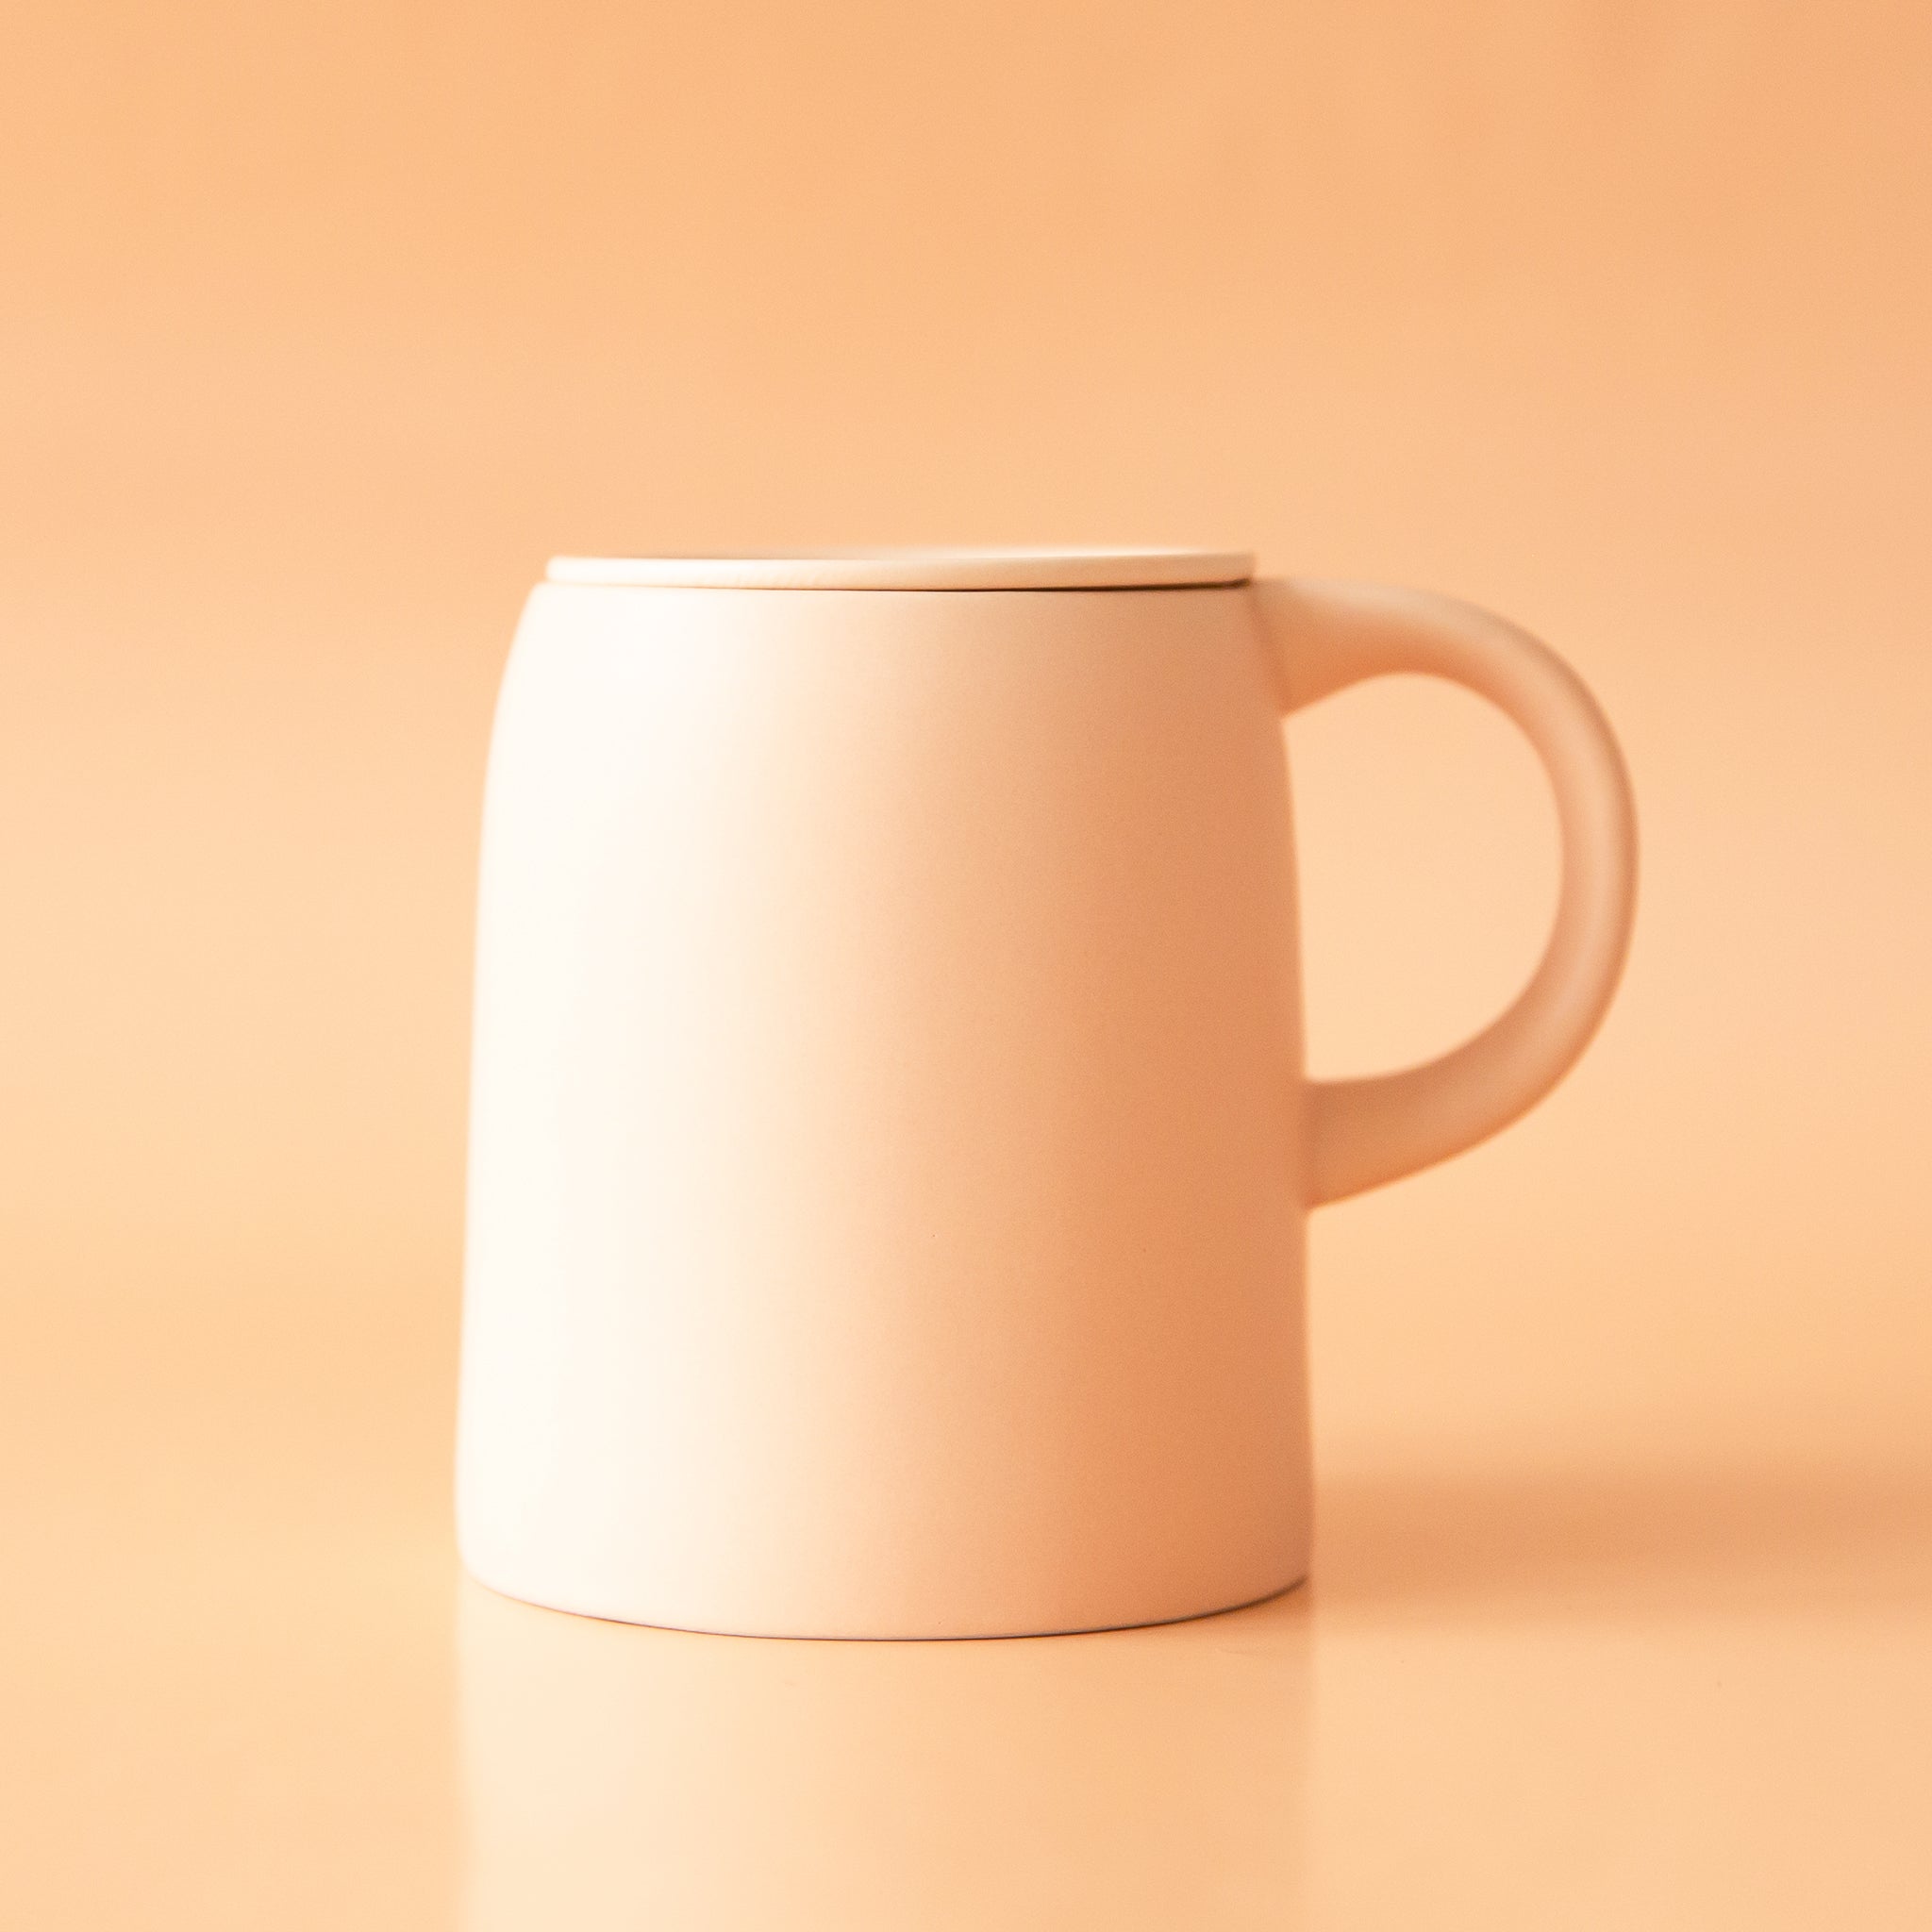 On a neutral background is a ceramic mug with an infuser cup to insert inside the rim of the mug.